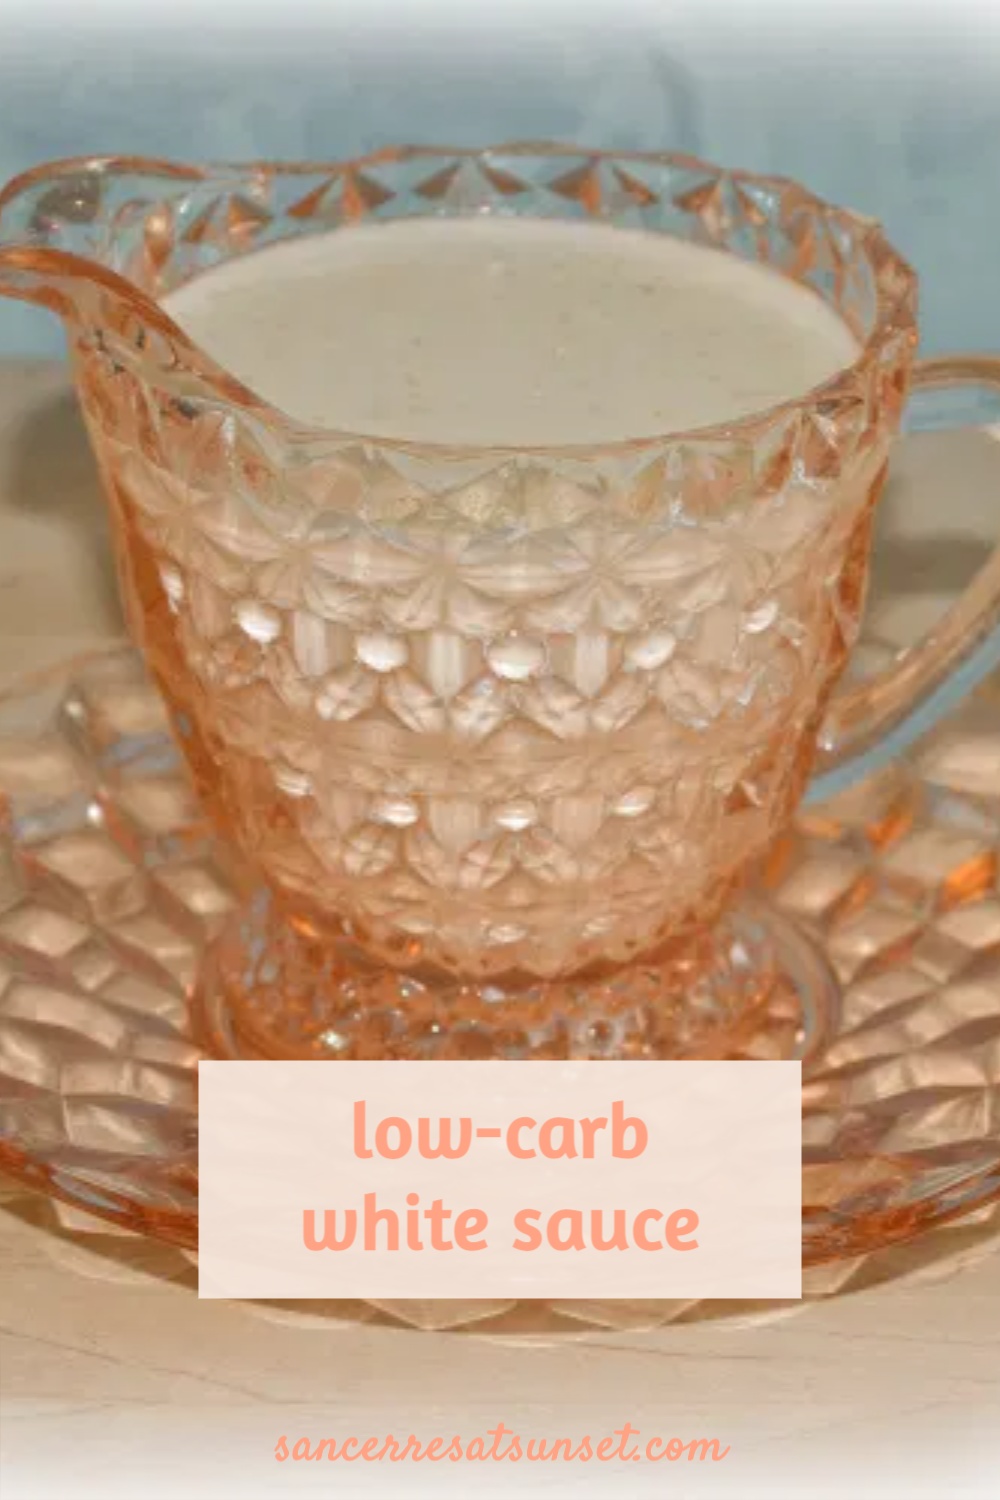 How to Make Low-Carb White Sauce